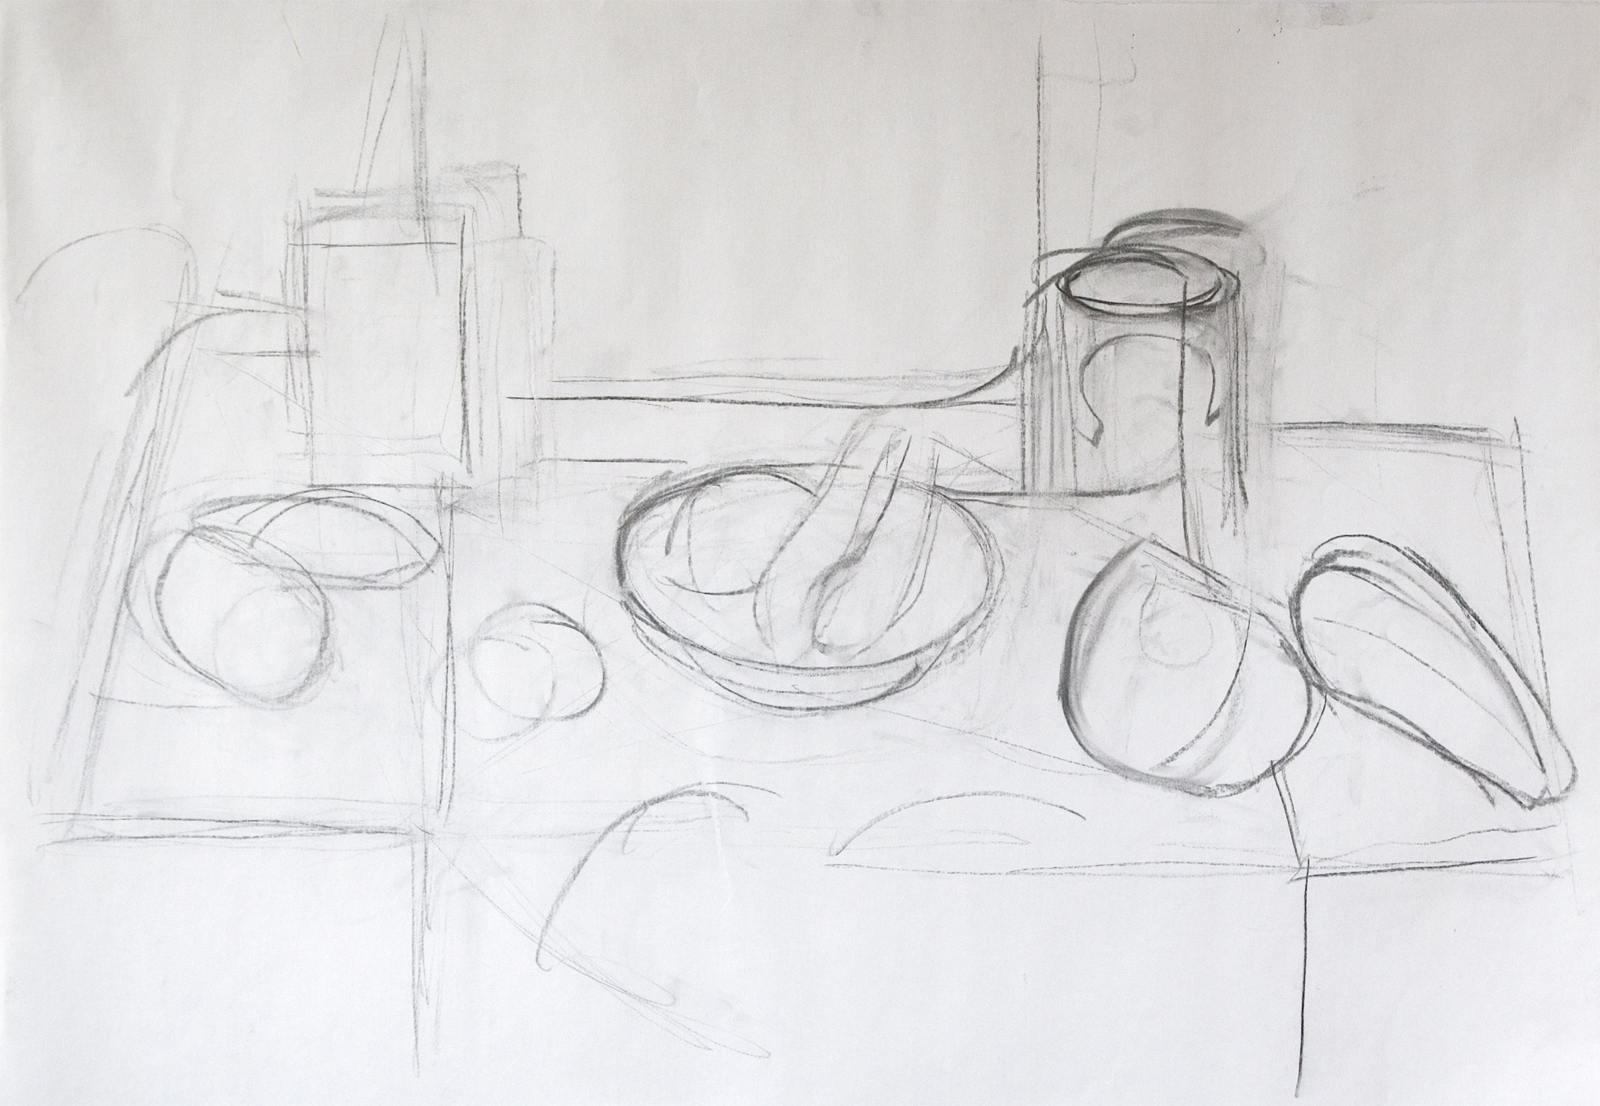   El Pico Can and Tea Box (study),  2006, charcoal on paper  (Private collection)  